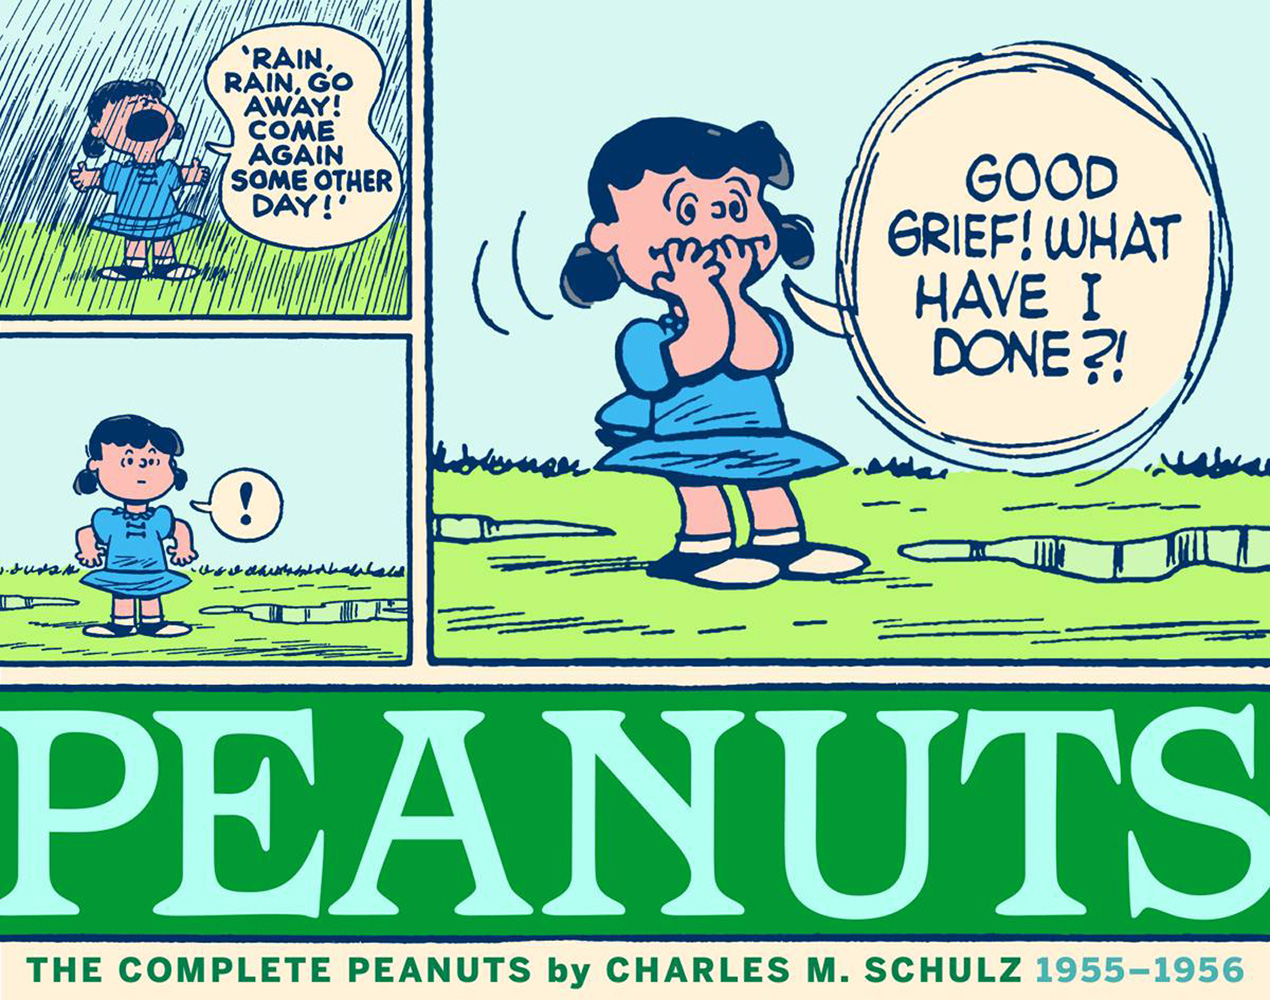 The Complete Peanuts 1955-1956 (Volume 3) Paperback Edition